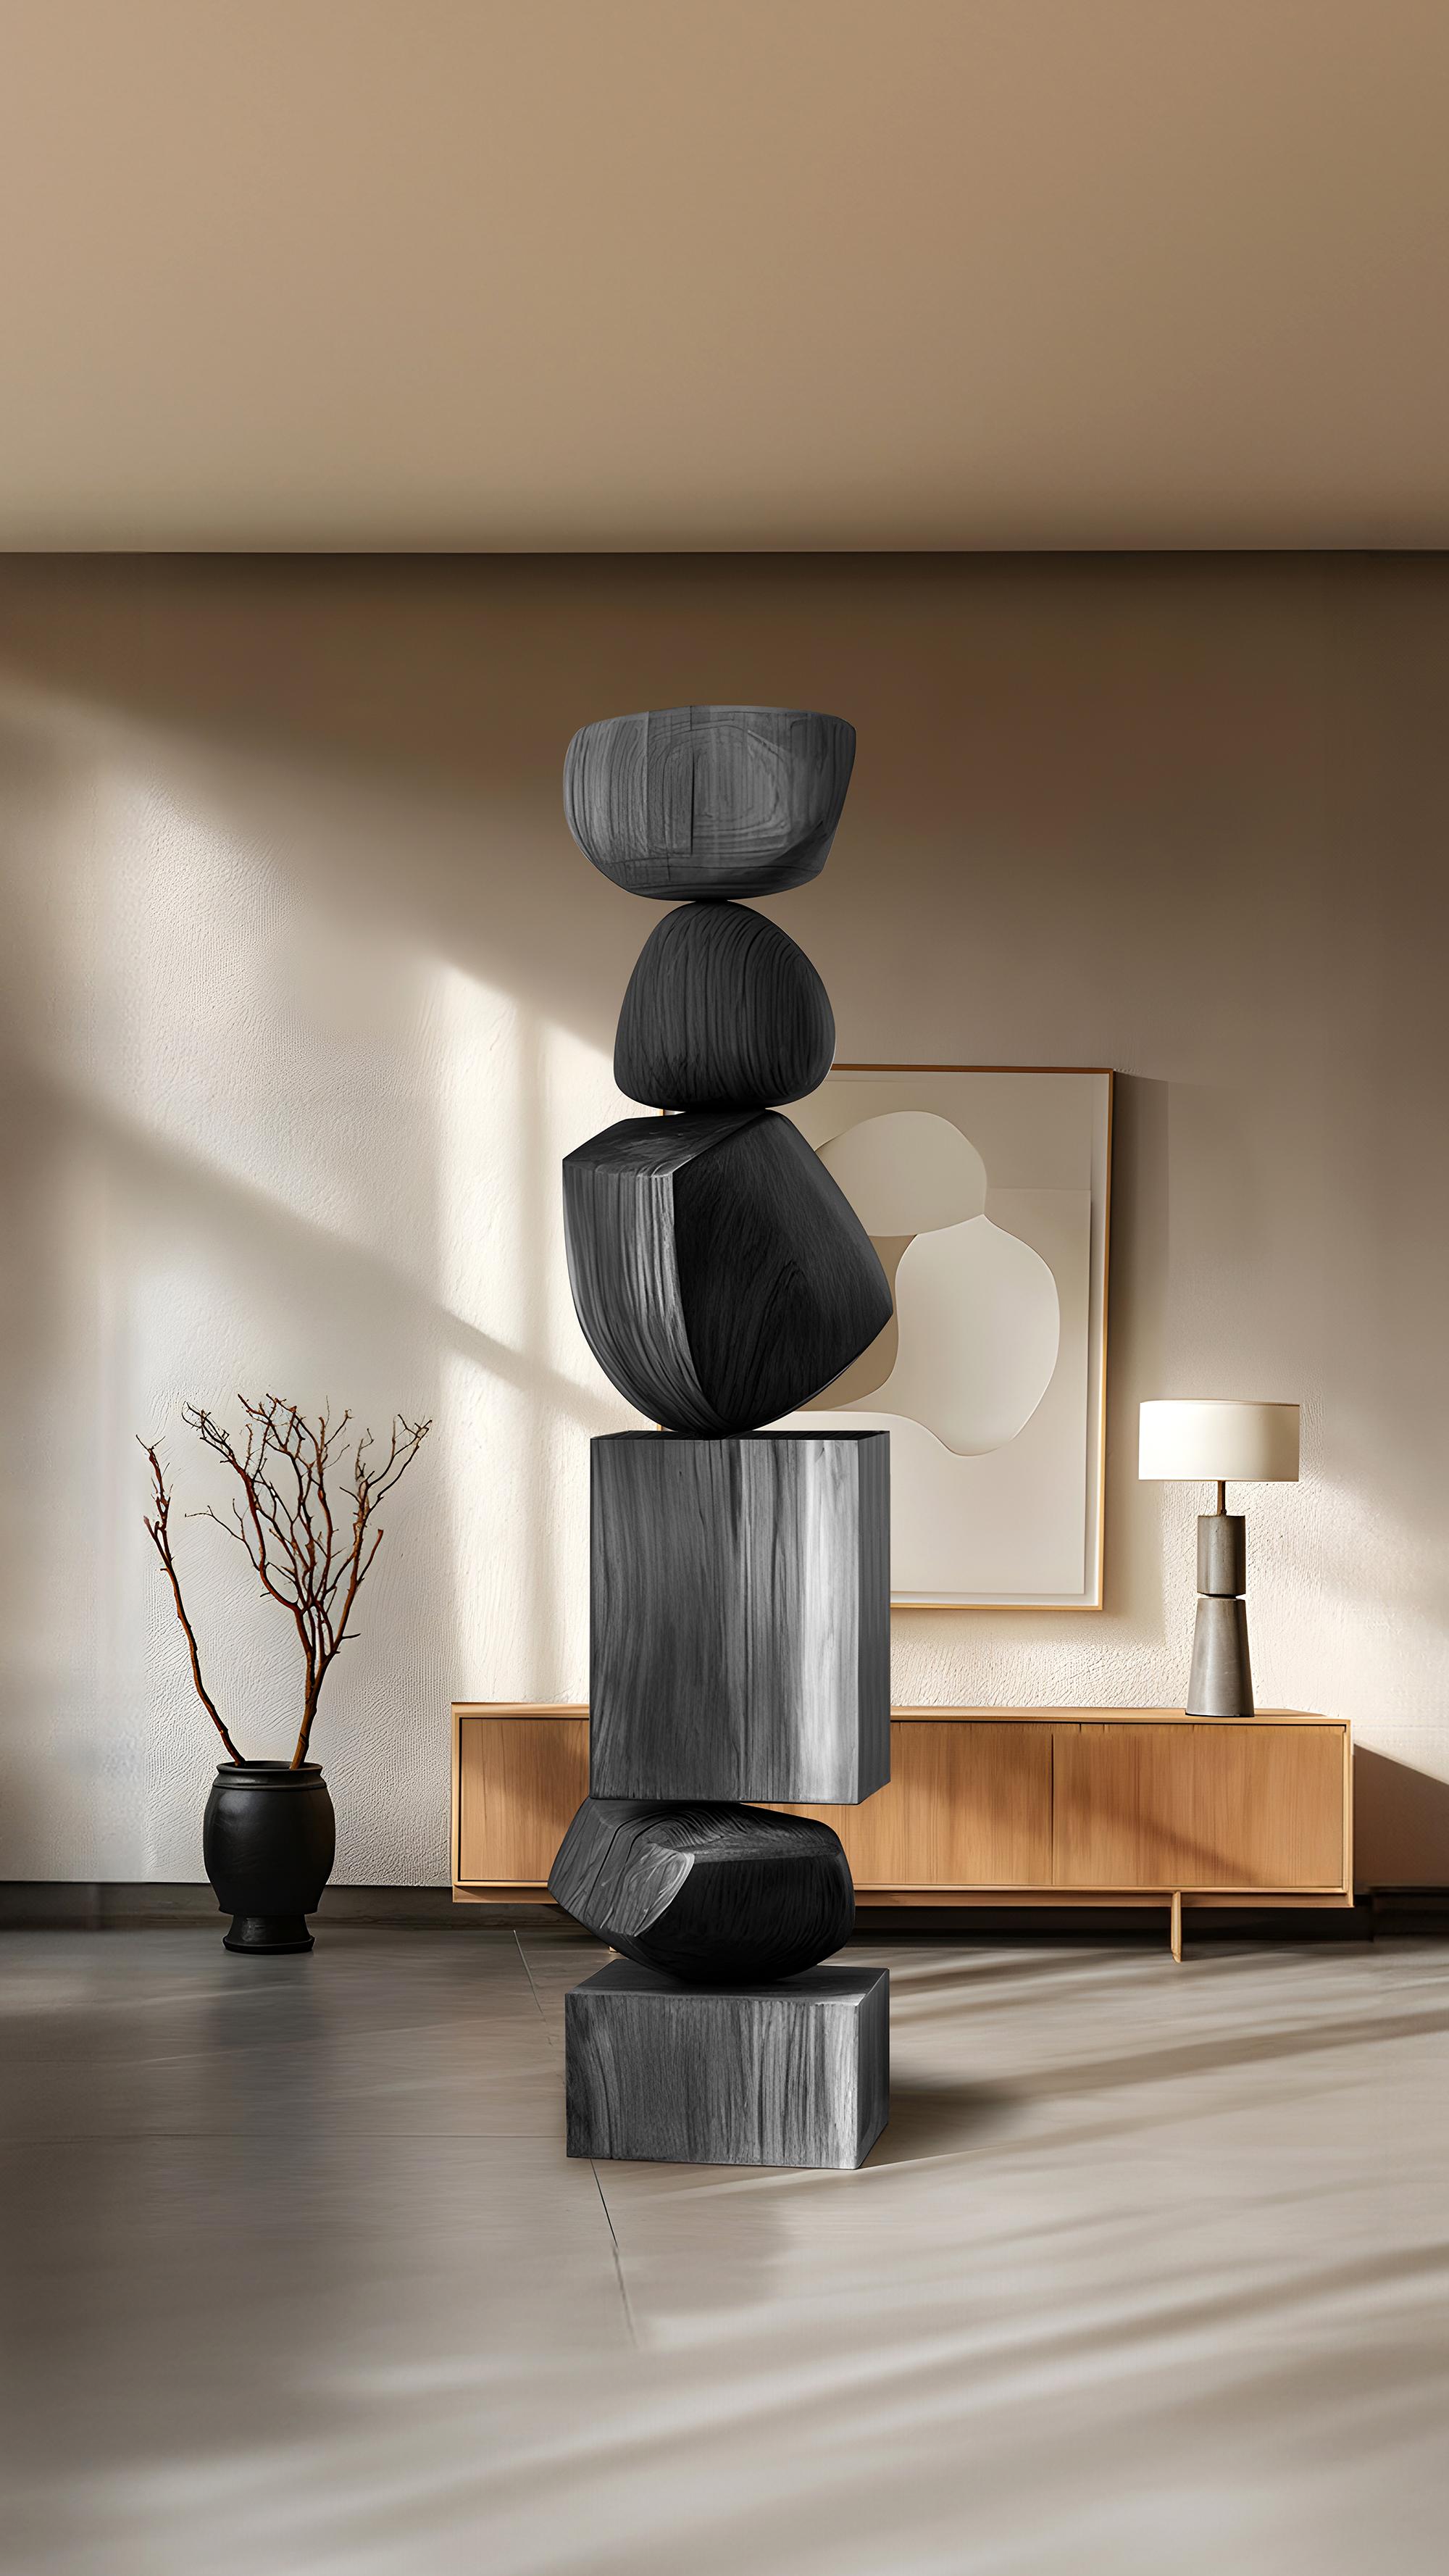 Hand-Crafted Design of Sleek Darkness, Modern Black Solid Wood Totem by NONO, Still Stand 101 For Sale